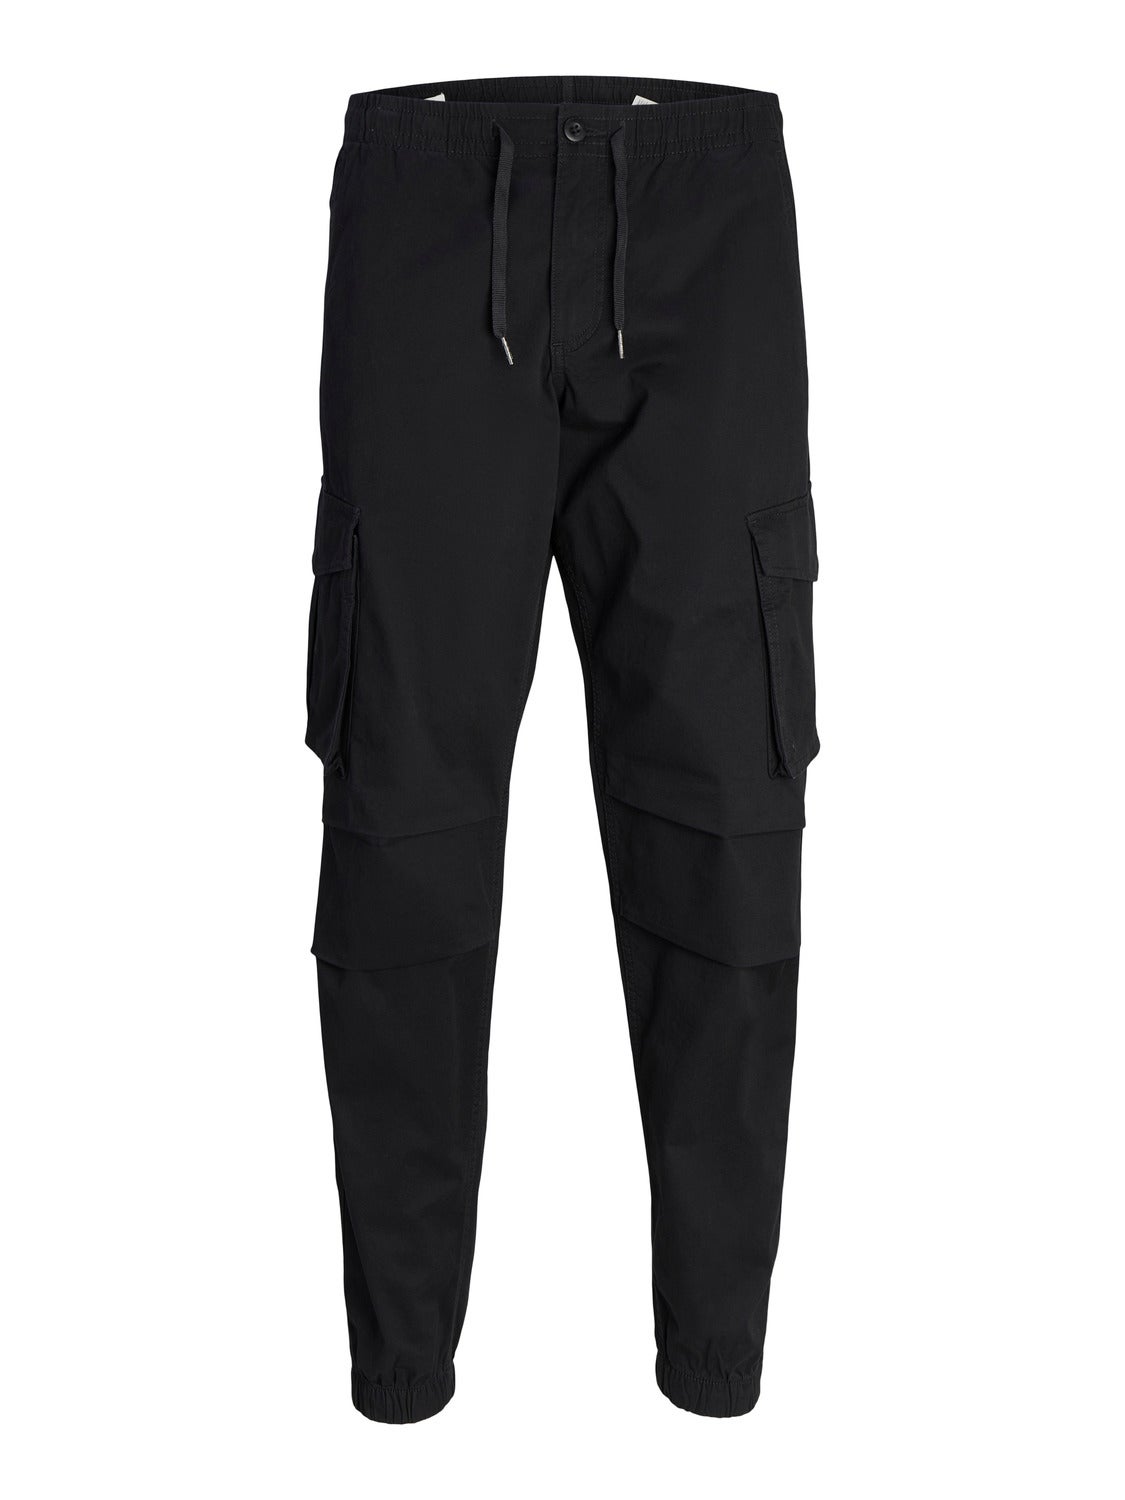 & | Cargo | Jones® Fit trousers Jack Relaxed Black